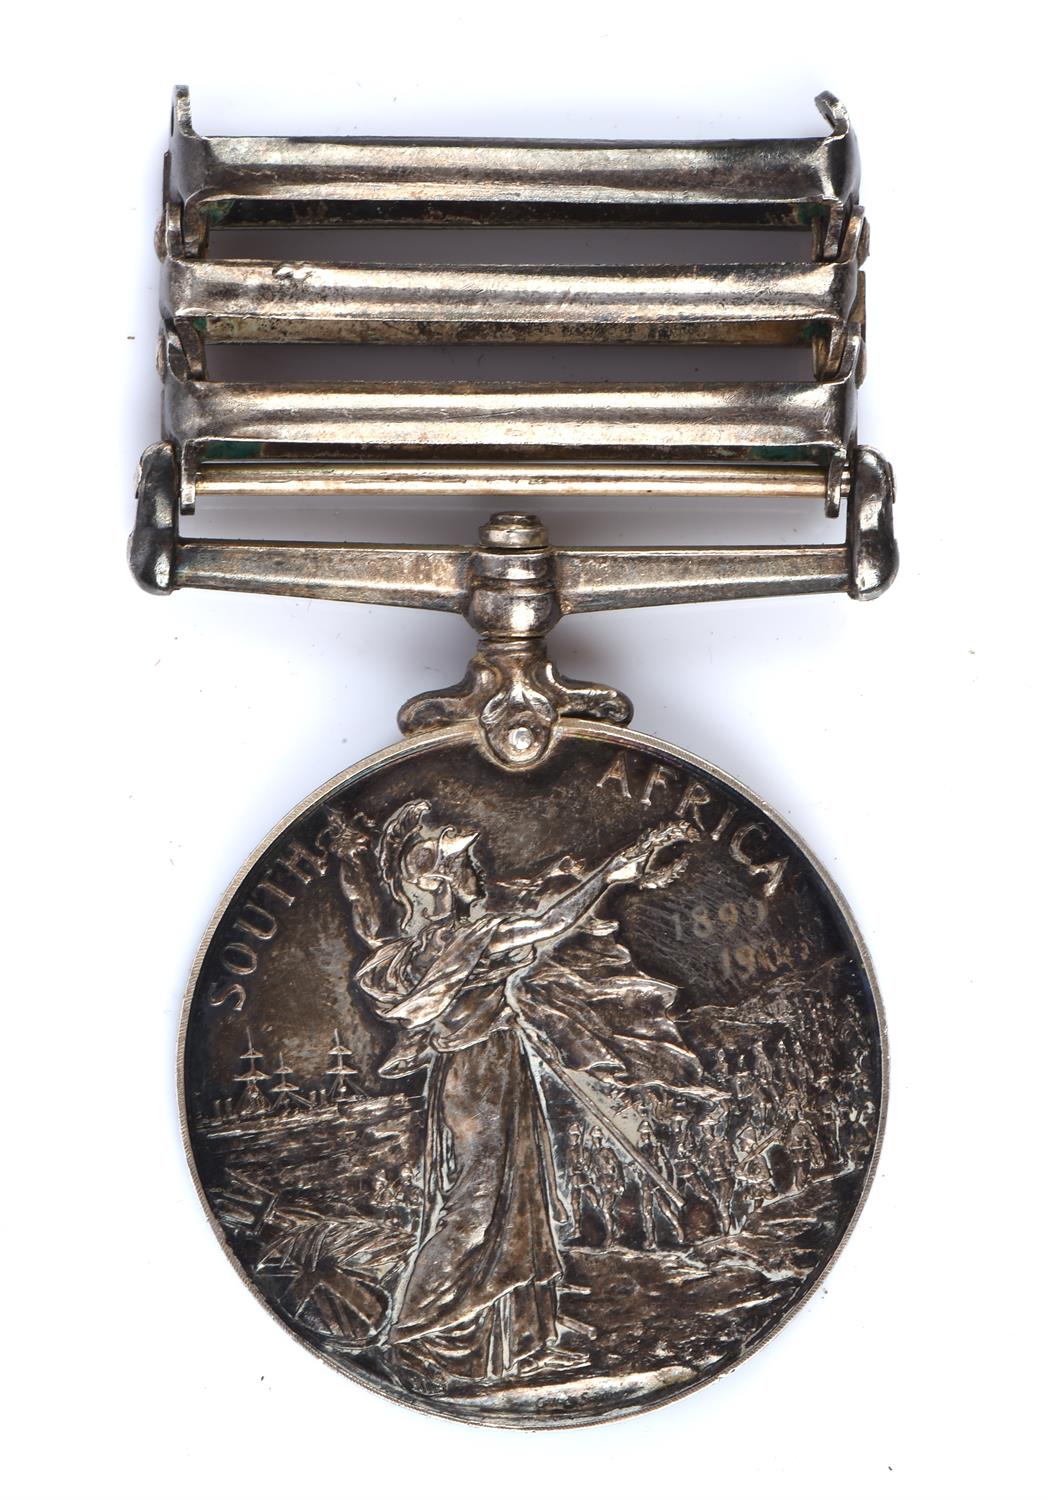 Queens South Africa Boer War medal with three clasps for Transvaal, Orange Free state and Cape - Bild 2 aus 2